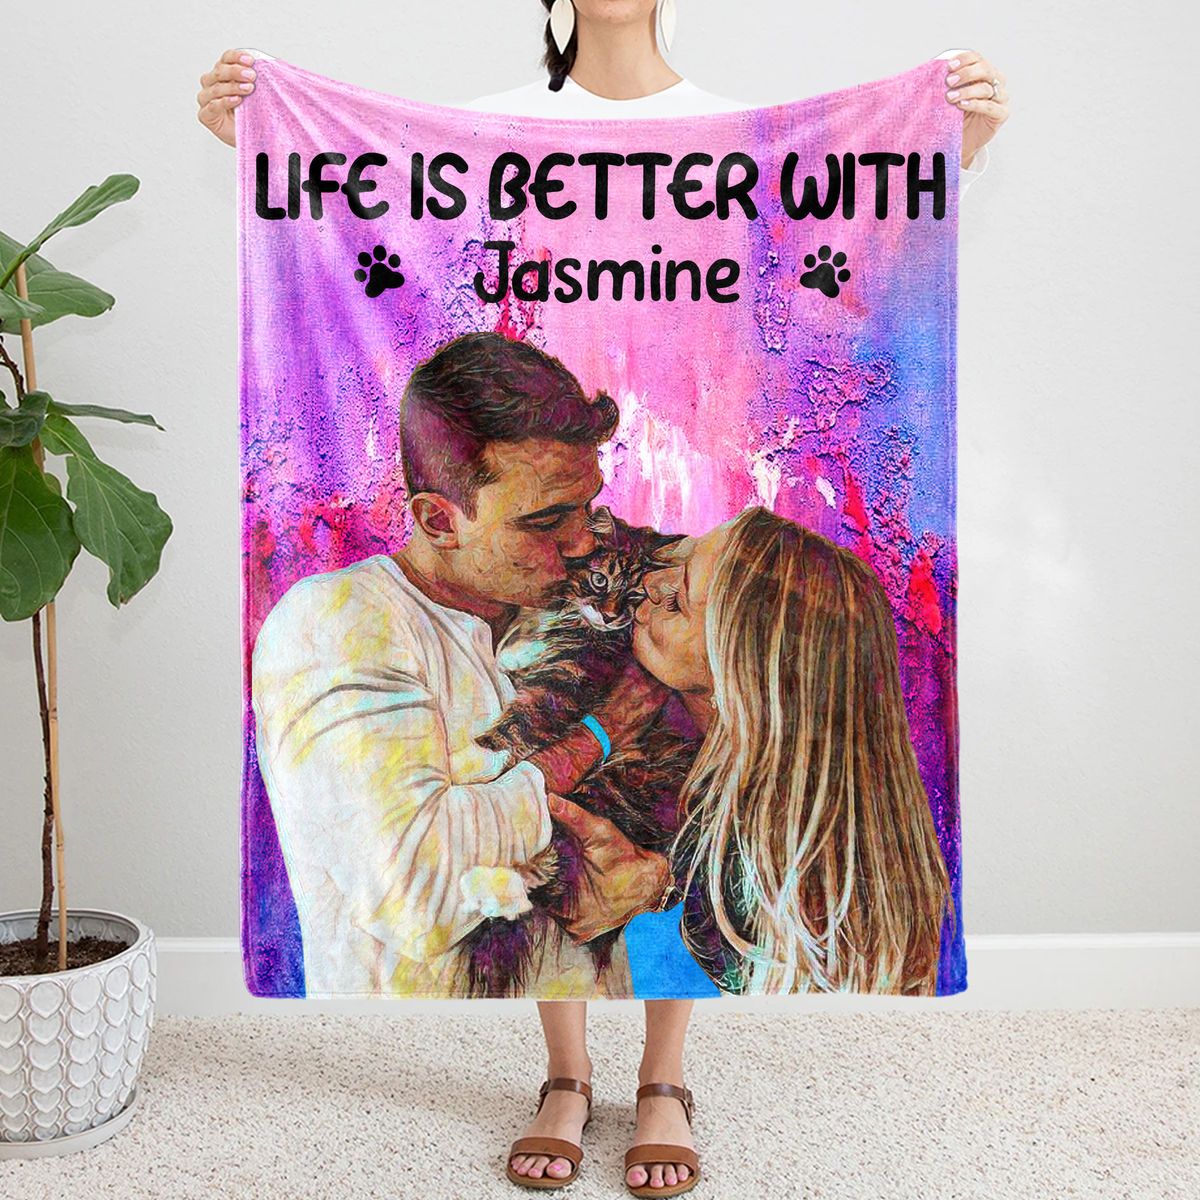 Fleece Blanket - Photo Blanket - Photo Blanket - Cat Photo Upload - Life Is Better With